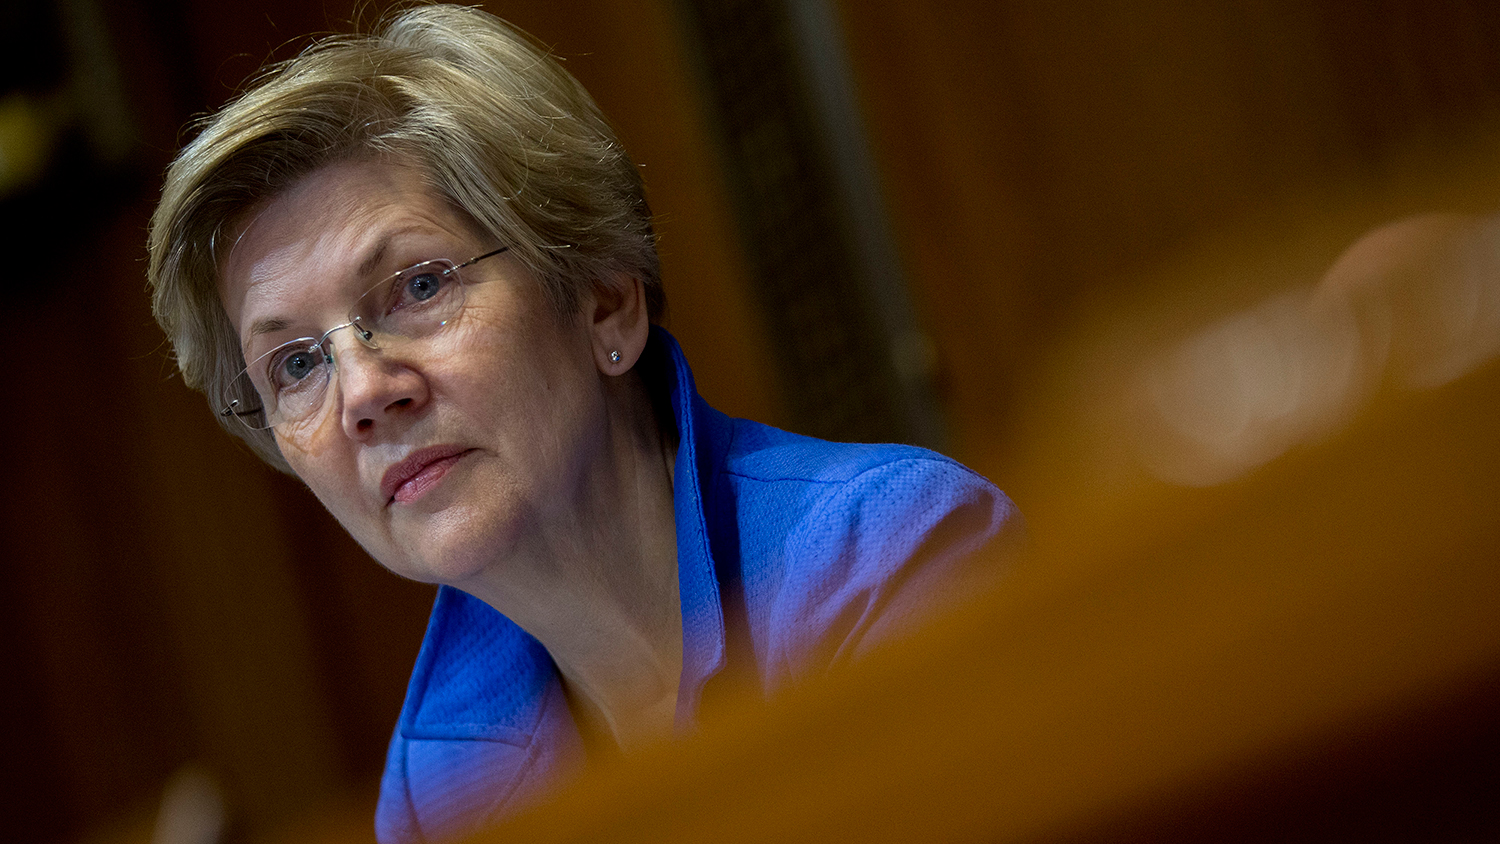 Senator Elizabeth Warren, a Democrat from Massachusetts, attends a Senate Energy and Natural Resources Committee business meeting to markup an original bill to approve the Keystone XL pipeline in Washington, D.C., U.S., on Thursday, Jan. 8, 2015.
